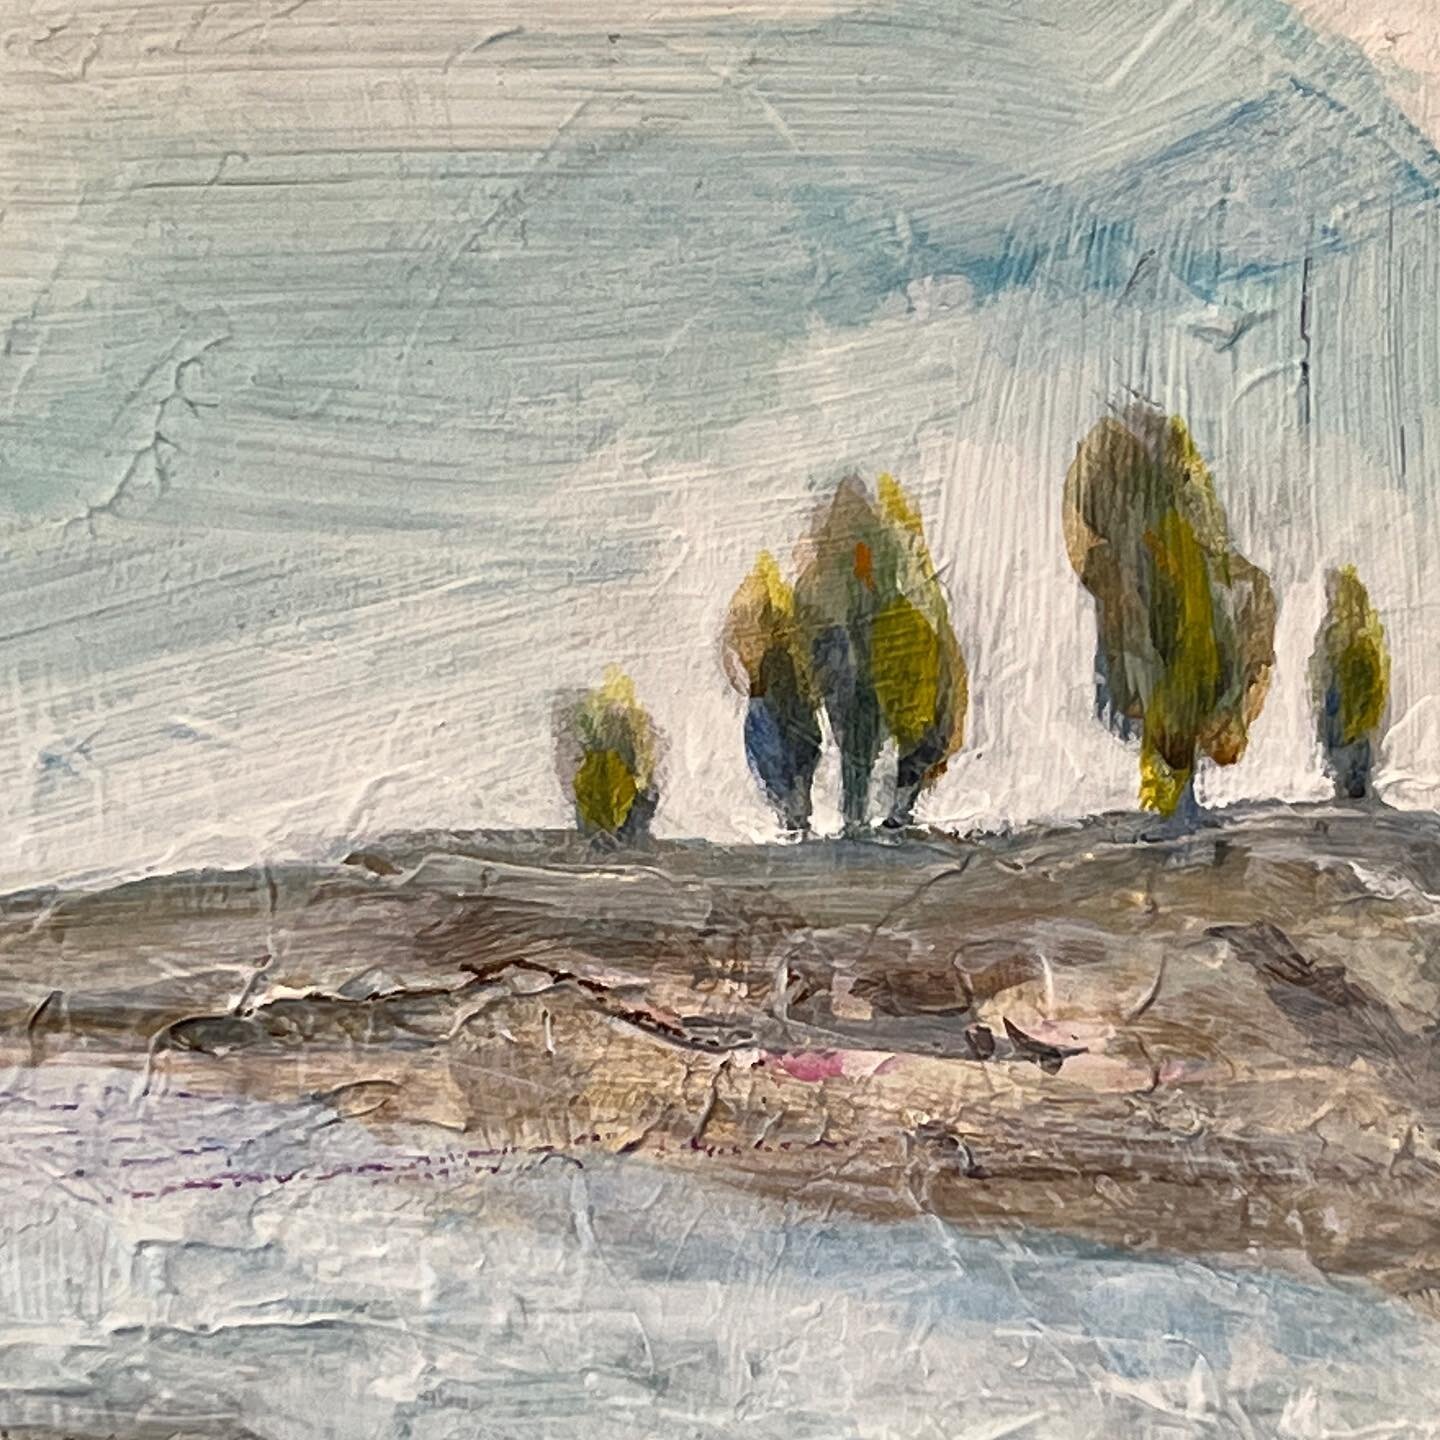 A detail from one of my new paintings 'Restful Places' 
.
.
.
.
#thrivetogethernetwork #fineart #contemporaryart #originalart #contemporarypainting #abstractart #abstractlandscape #abstractlandscapepainting #landscapepainting #printmakingart #abstrac